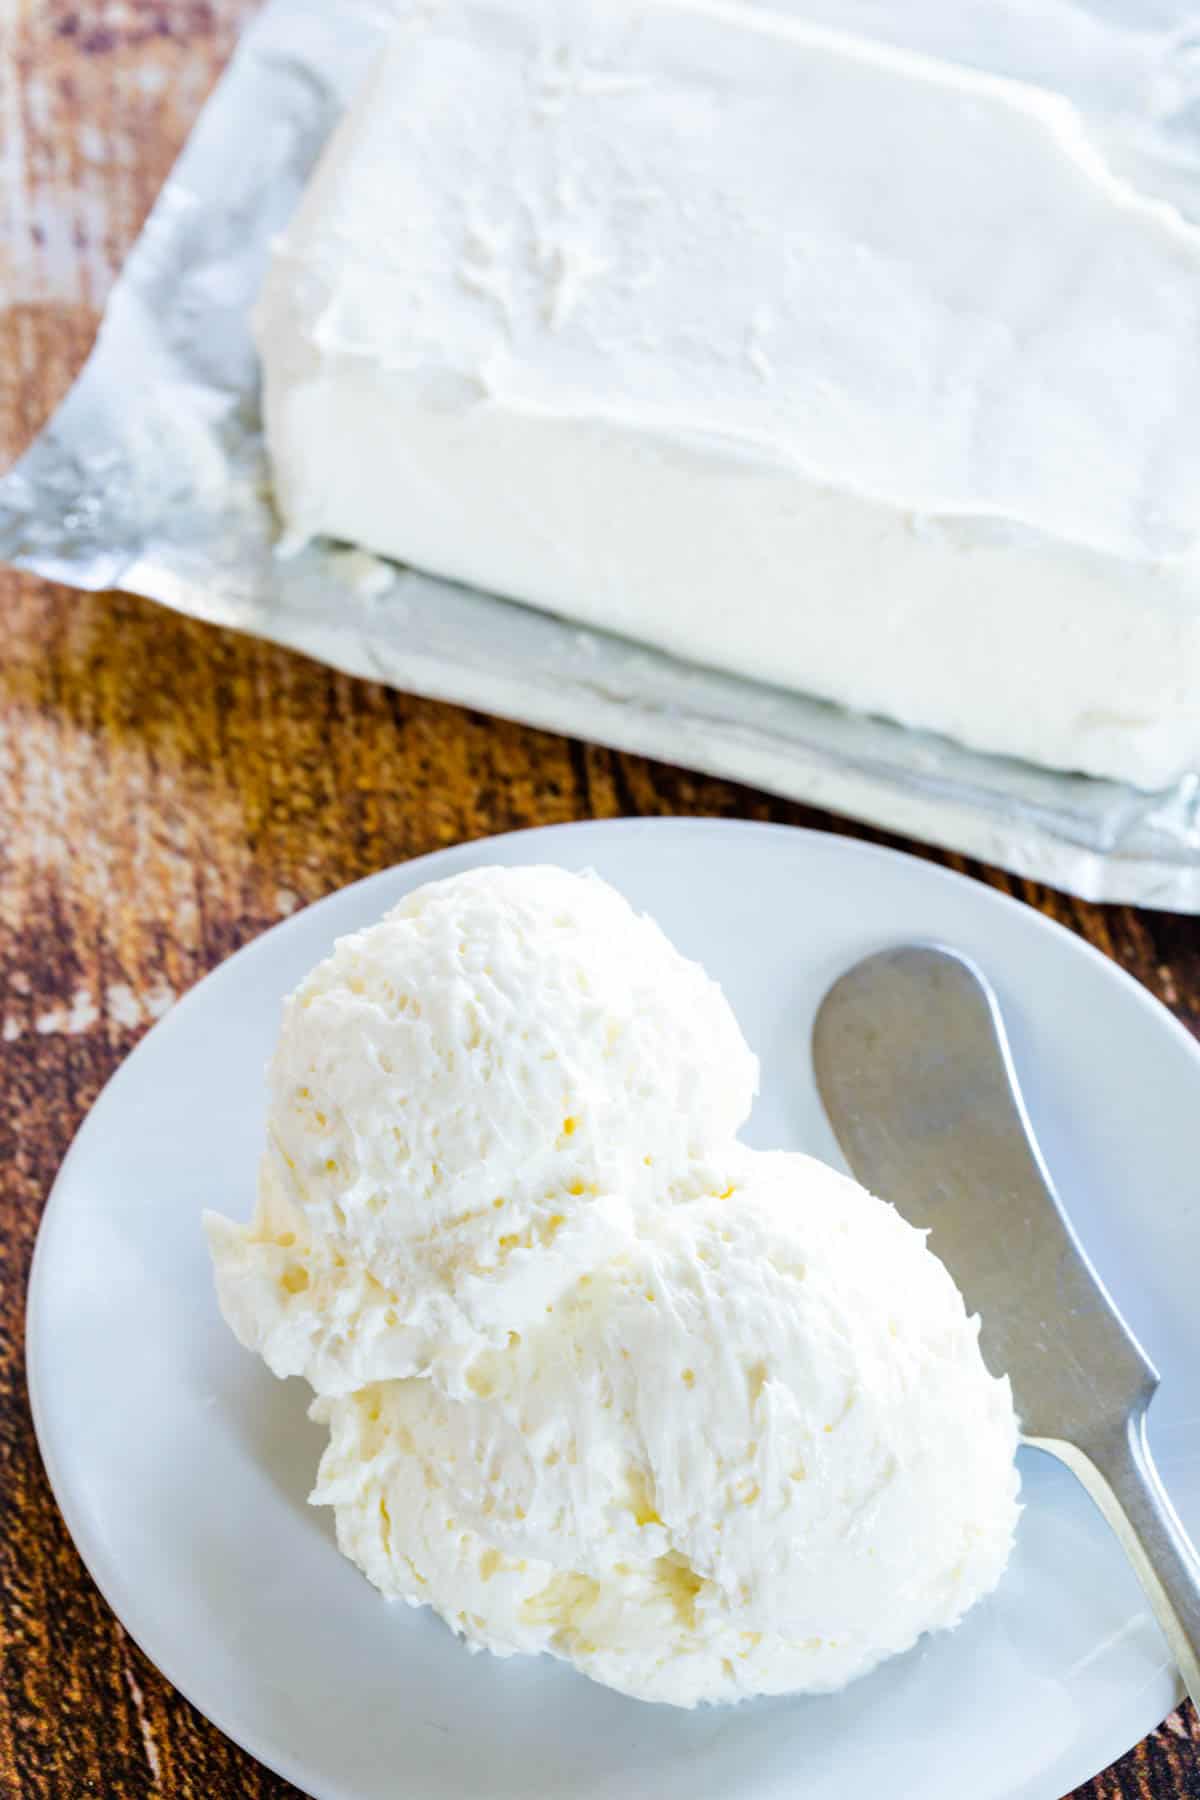 Scoops of whipped cream cheese on a whit plate with a small spread knife and a block of cream cheese blurred in the background.